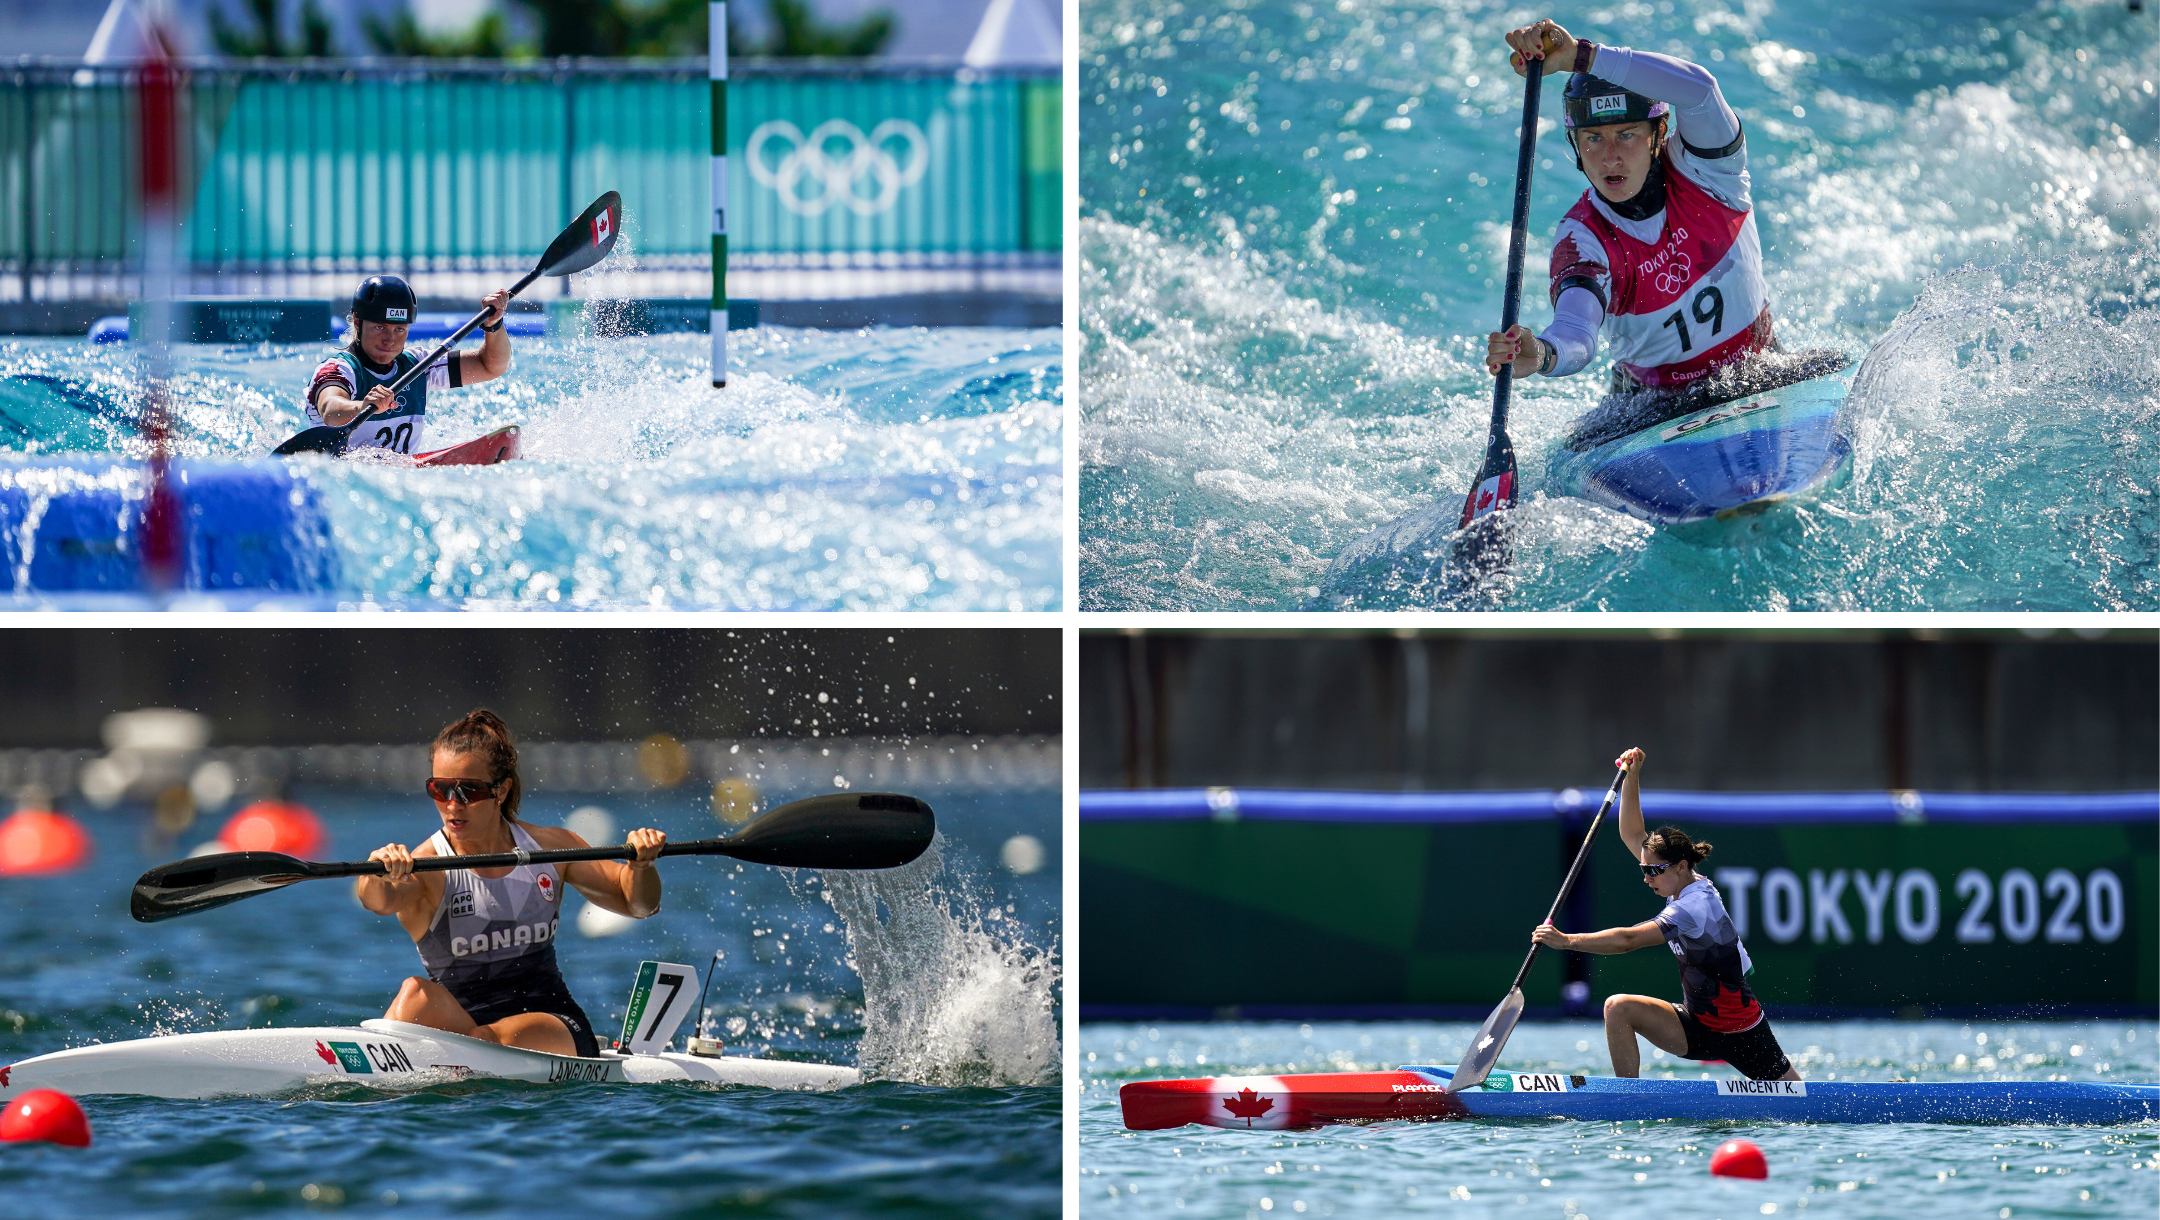 What are the differences between canoes and kayaks, sprint vs slalom events?